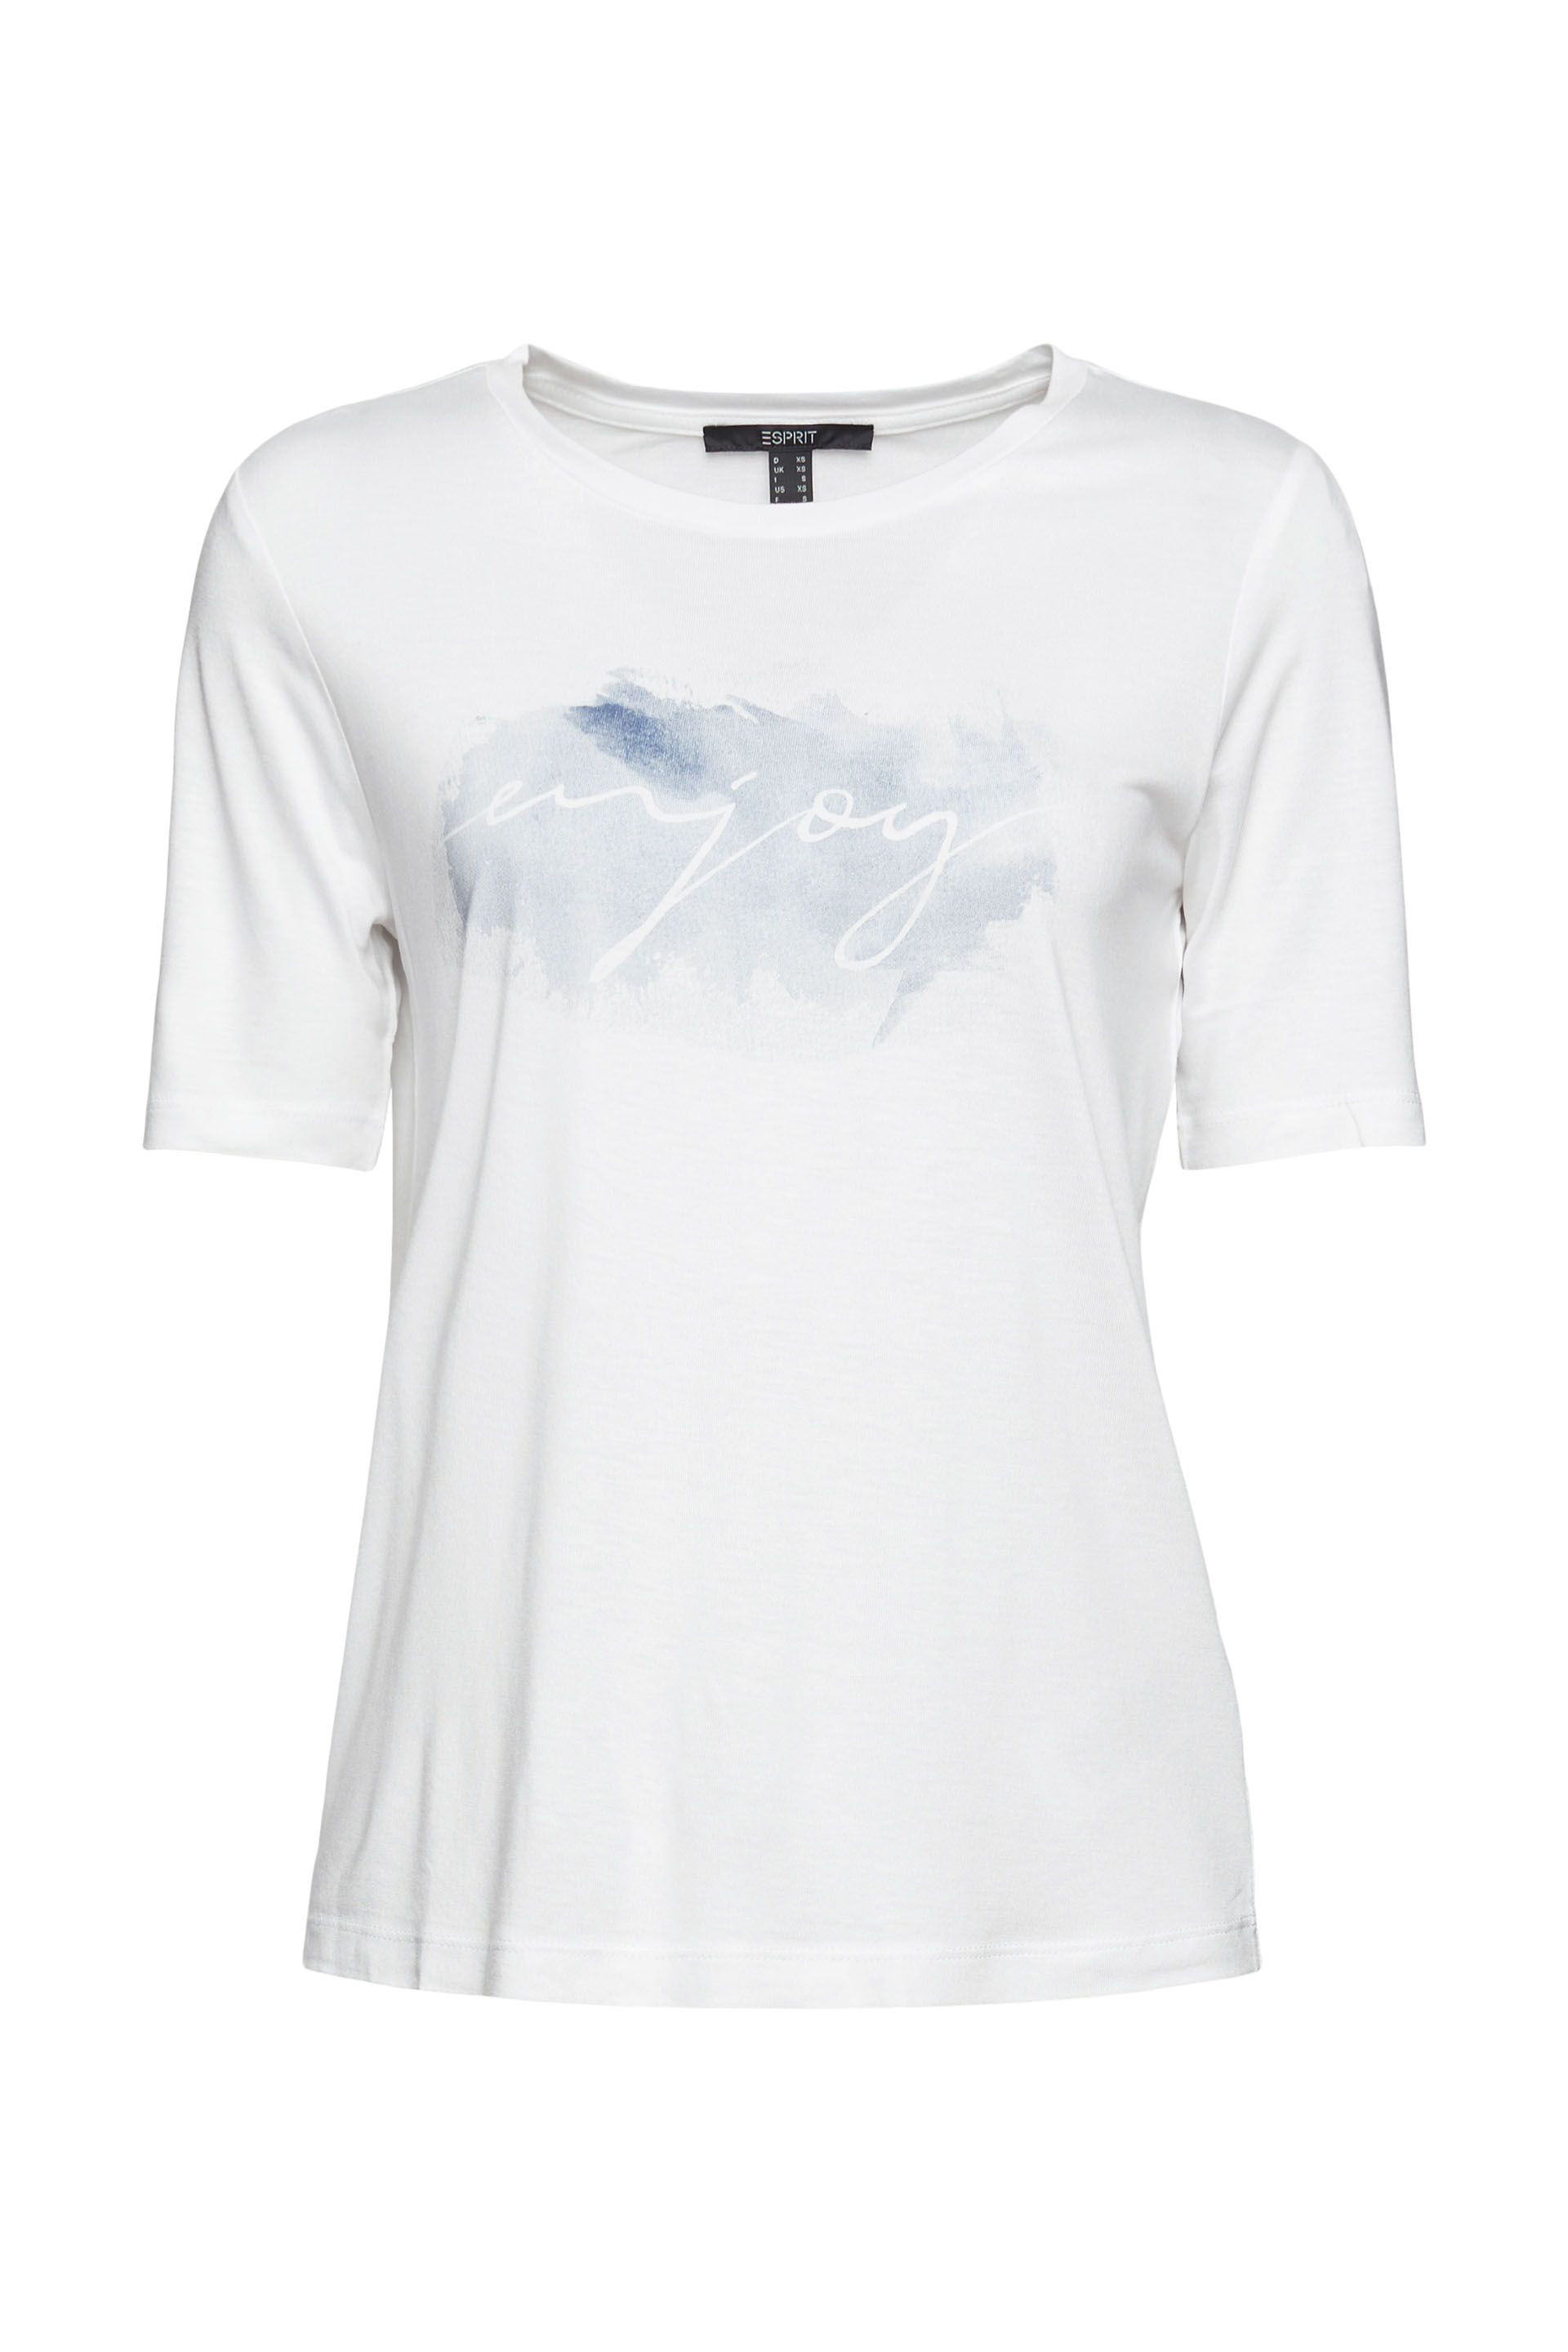 T-shirt con scritta stampata, Bianco, large image number 0